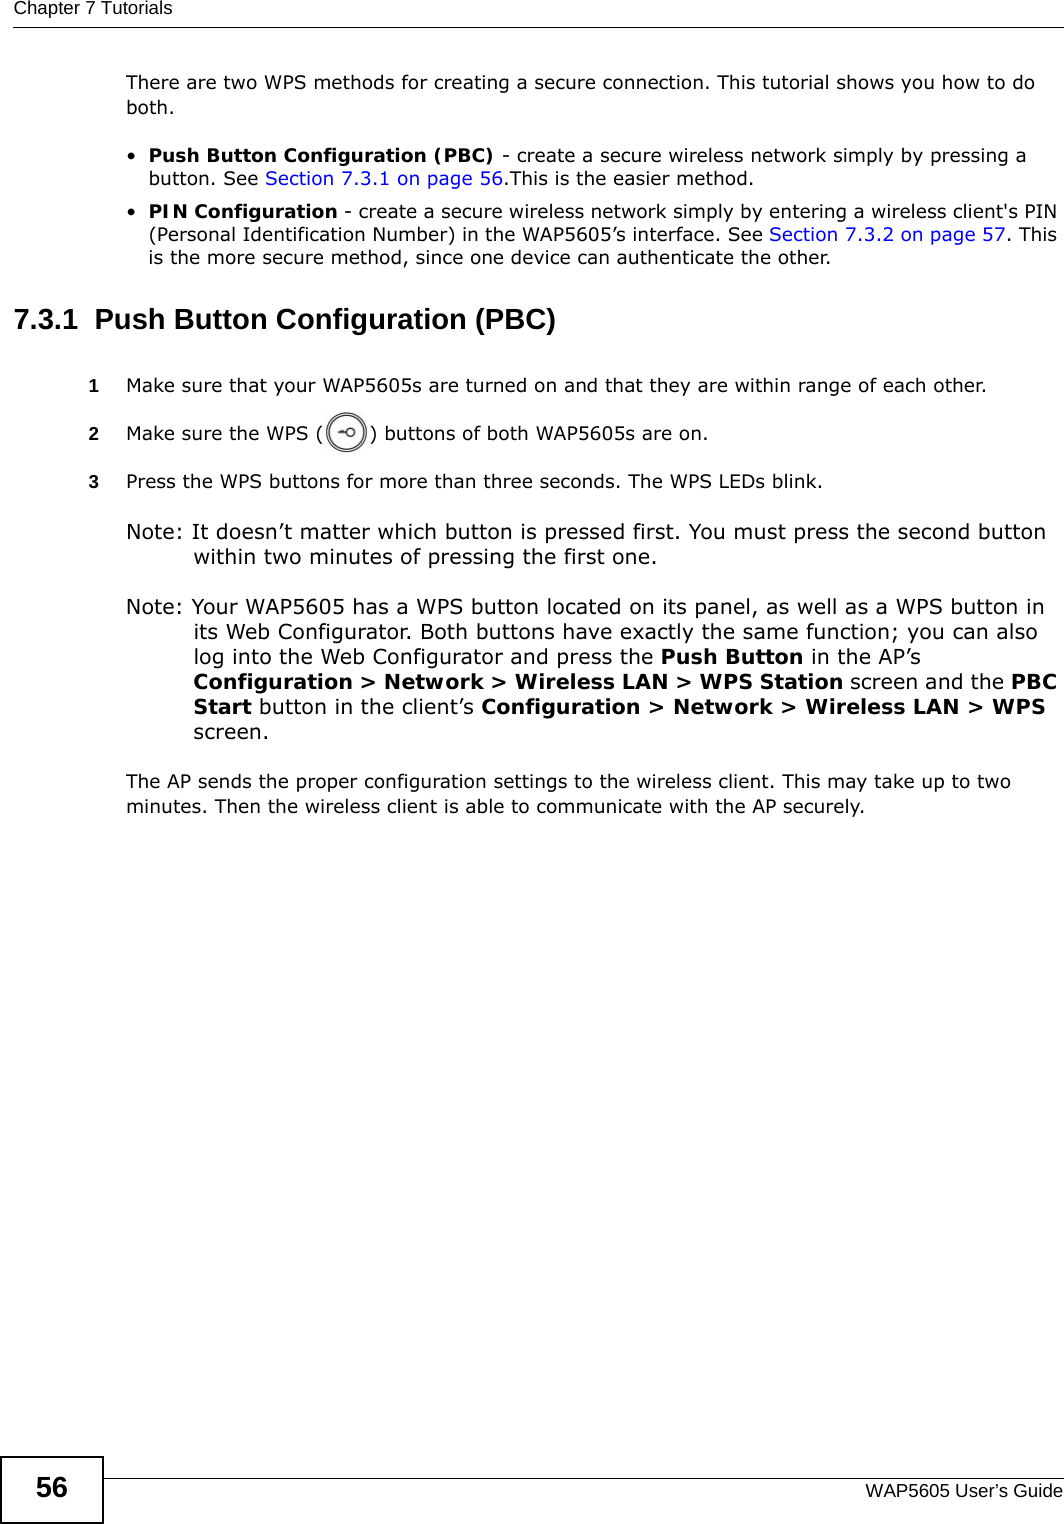 Chapter 7 TutorialsWAP5605 User’s Guide56There are two WPS methods for creating a secure connection. This tutorial shows you how to do both.•Push Button Configuration (PBC) - create a secure wireless network simply by pressing a button. See Section 7.3.1 on page 56.This is the easier method.•PIN Configuration - create a secure wireless network simply by entering a wireless client&apos;s PIN (Personal Identification Number) in the WAP5605’s interface. See Section 7.3.2 on page 57. This is the more secure method, since one device can authenticate the other.7.3.1  Push Button Configuration (PBC)1Make sure that your WAP5605s are turned on and that they are within range of each other. 2Make sure the WPS ( ) buttons of both WAP5605s are on.3Press the WPS buttons for more than three seconds. The WPS LEDs blink.Note: It doesn’t matter which button is pressed first. You must press the second button within two minutes of pressing the first one.  Note: Your WAP5605 has a WPS button located on its panel, as well as a WPS button in its Web Configurator. Both buttons have exactly the same function; you can also log into the Web Configurator and press the Push Button in the AP’s Configuration &gt; Network &gt; Wireless LAN &gt; WPS Station screen and the PBC Start button in the client’s Configuration &gt; Network &gt; Wireless LAN &gt; WPS screen.The AP sends the proper configuration settings to the wireless client. This may take up to two minutes. Then the wireless client is able to communicate with the AP securely. 